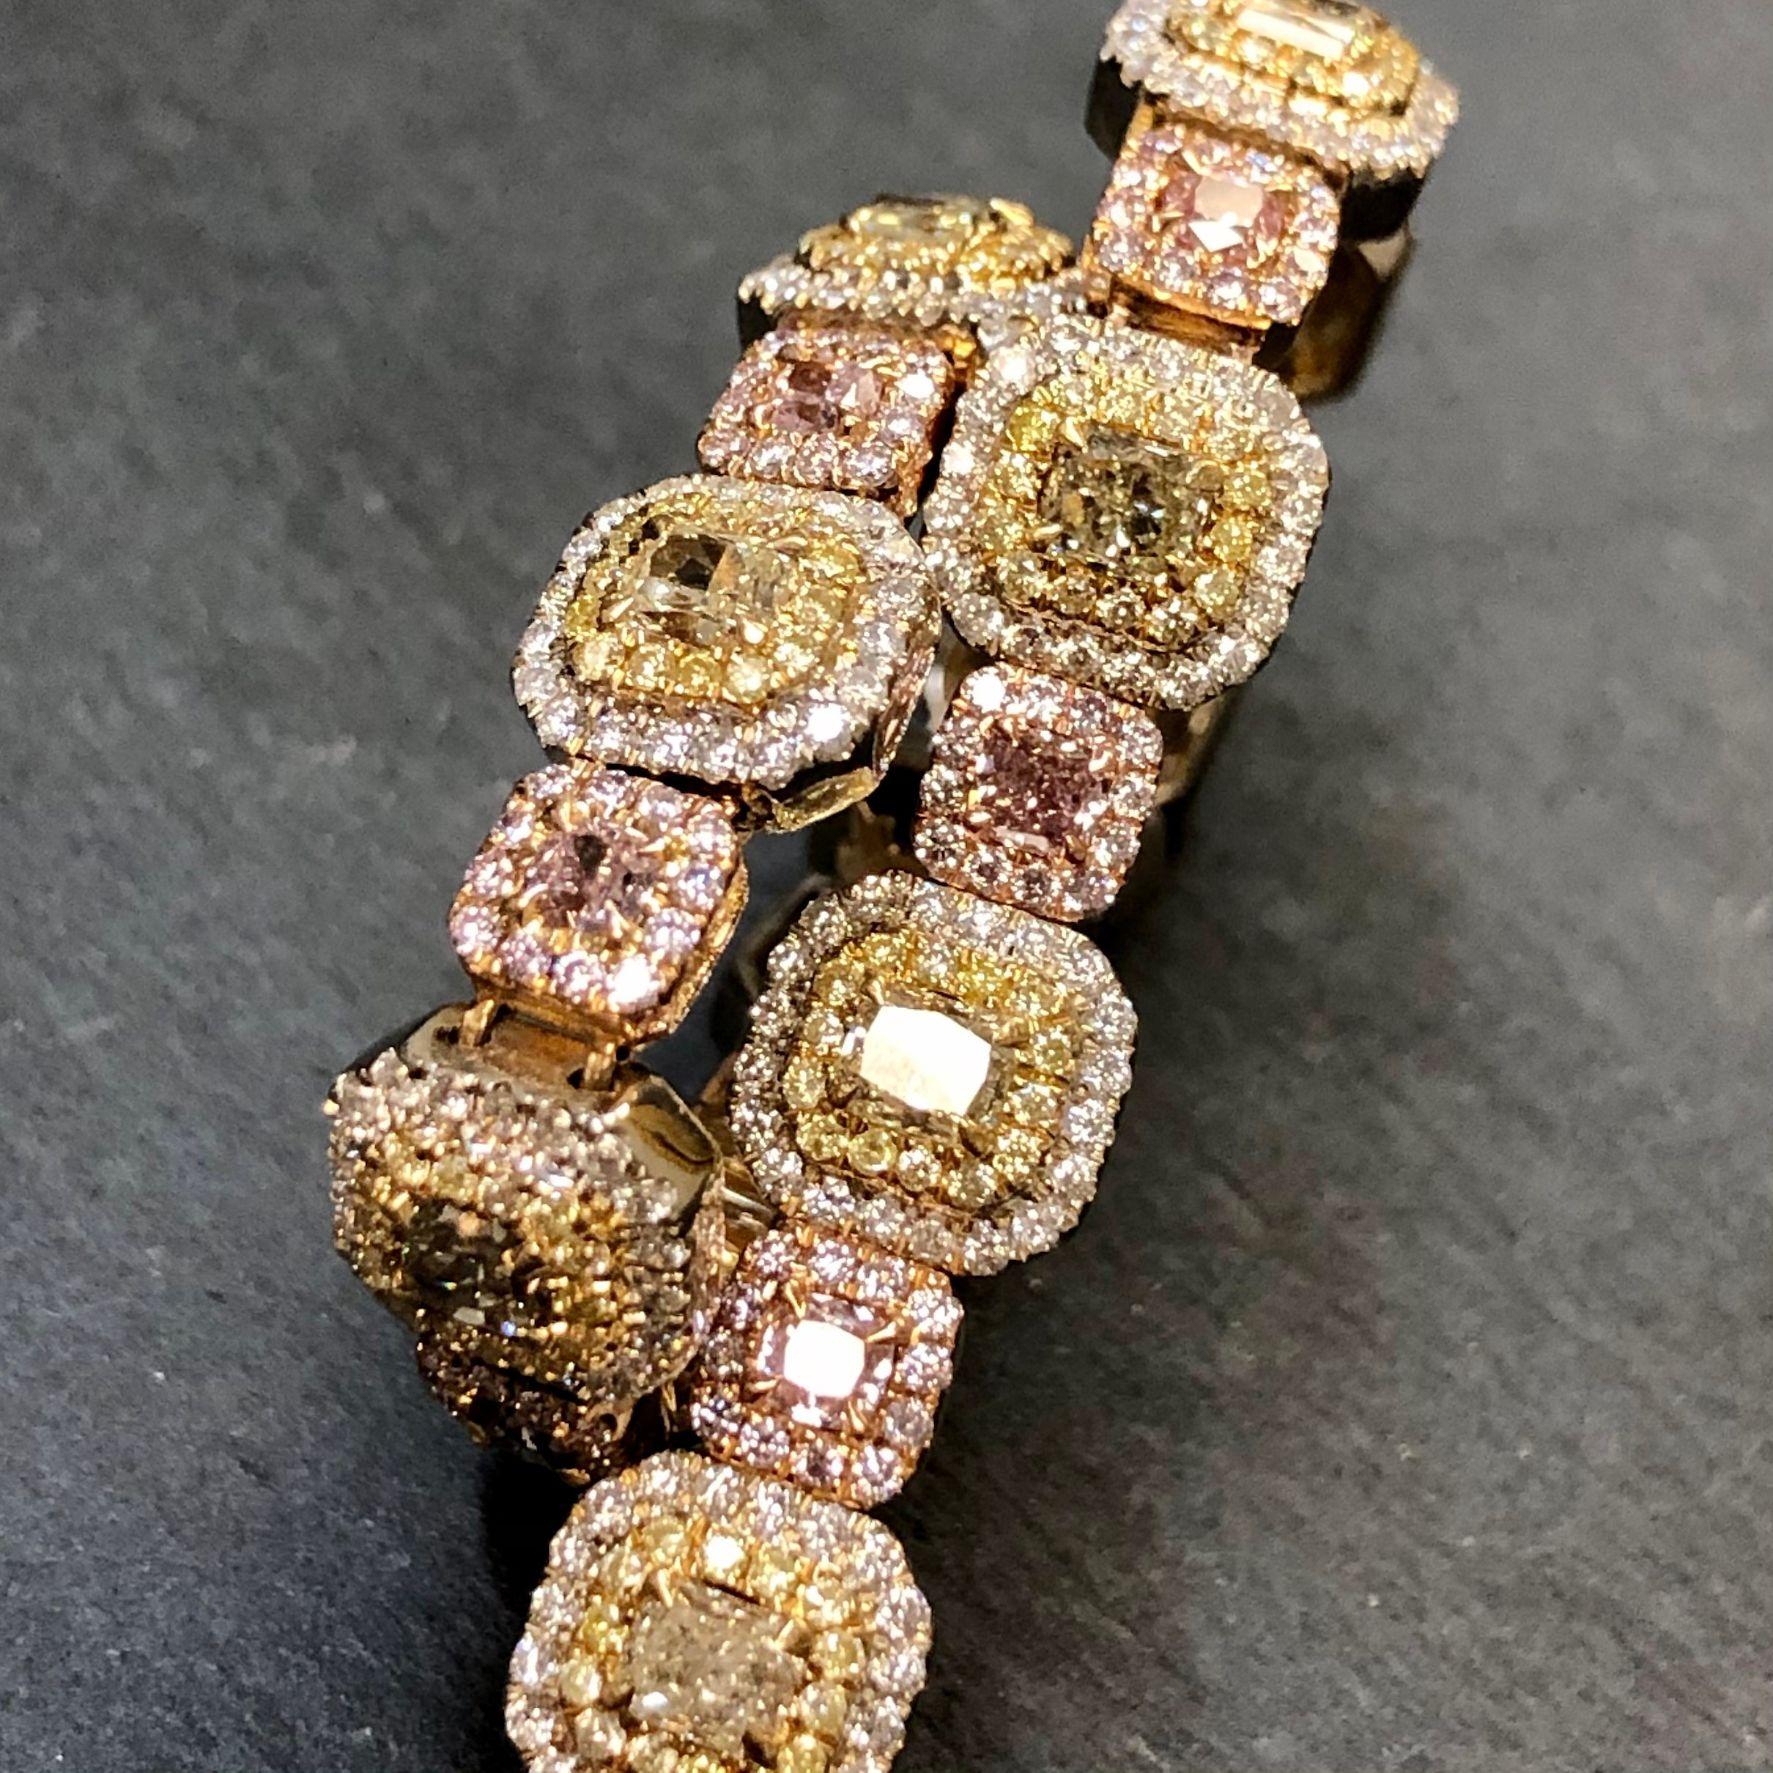 An incredible fancy colored diamond bracelet done in 18K yellow, white and pink gold set with numerous fancy colored diamonds with a total known weight of 8.28cttw. The exact breakdown is below:
Yellow Cushions - 13 Stones - 3.53cttw
Pink Cushions -